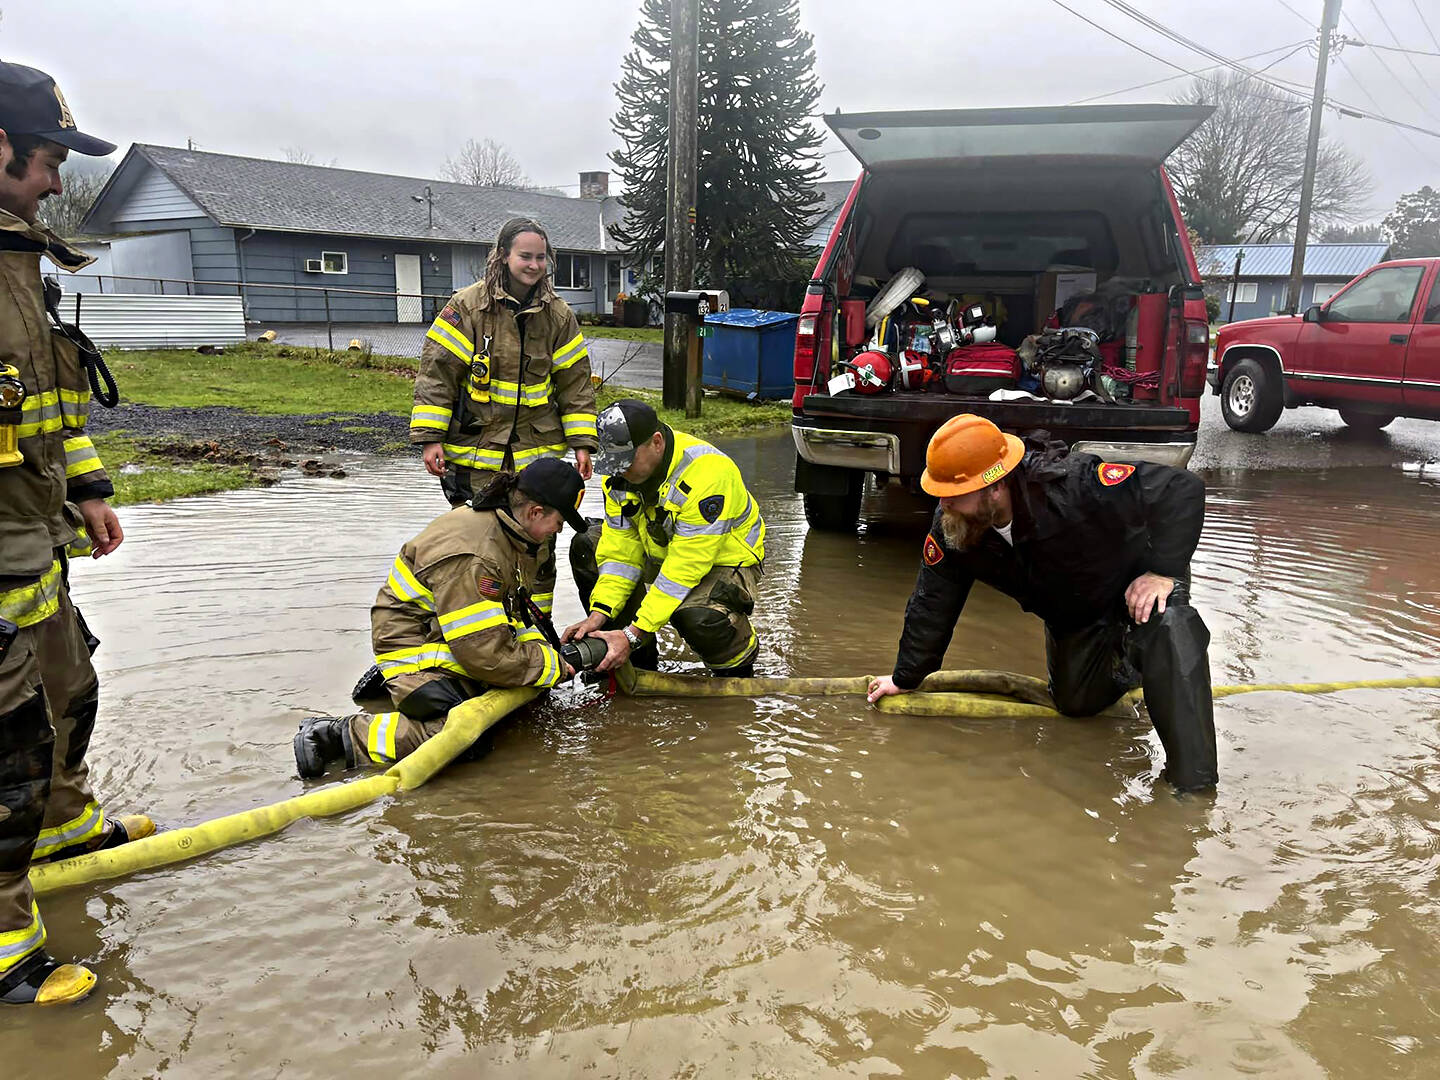 “I’ve seen fire and I’ve seen rain”
Clallam County Fire Protection District #1 was called out on Sunday to deal with an abundance of water over the roadway near 2nd Avenue.
With the help of Engine 91’s crew and a large pumper off of Tanker 91, it took about 4 hours to clear the street and surrounding houses of most of the large mass of water that was left from recent rains. Photo CCFD1